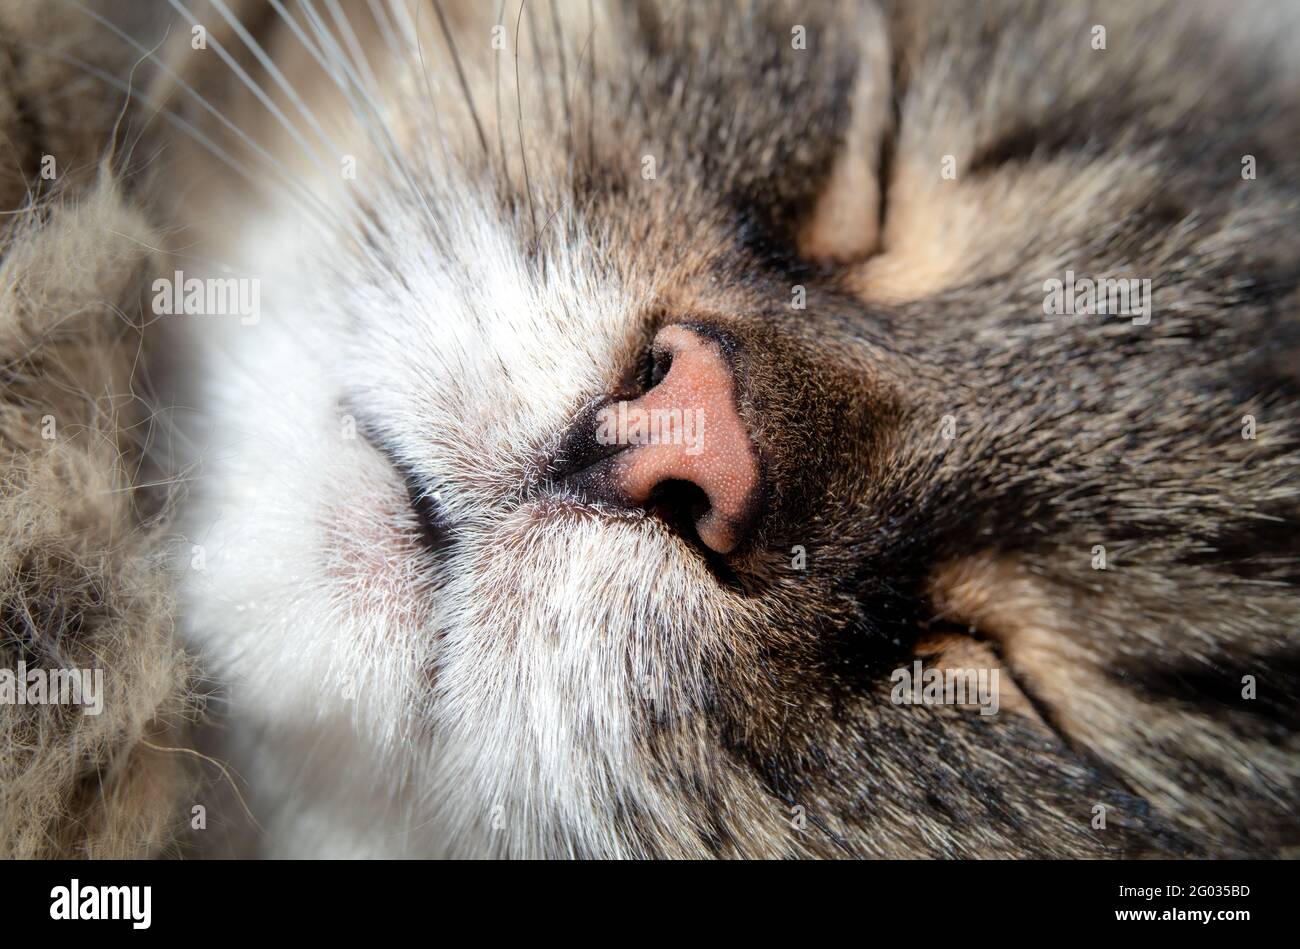 Senior cat face and nose close up, sleeping peaceful and relaxed sideways in the sun. 15 year old long hair female tabby cat with eyes closed. Selecti Stock Photo